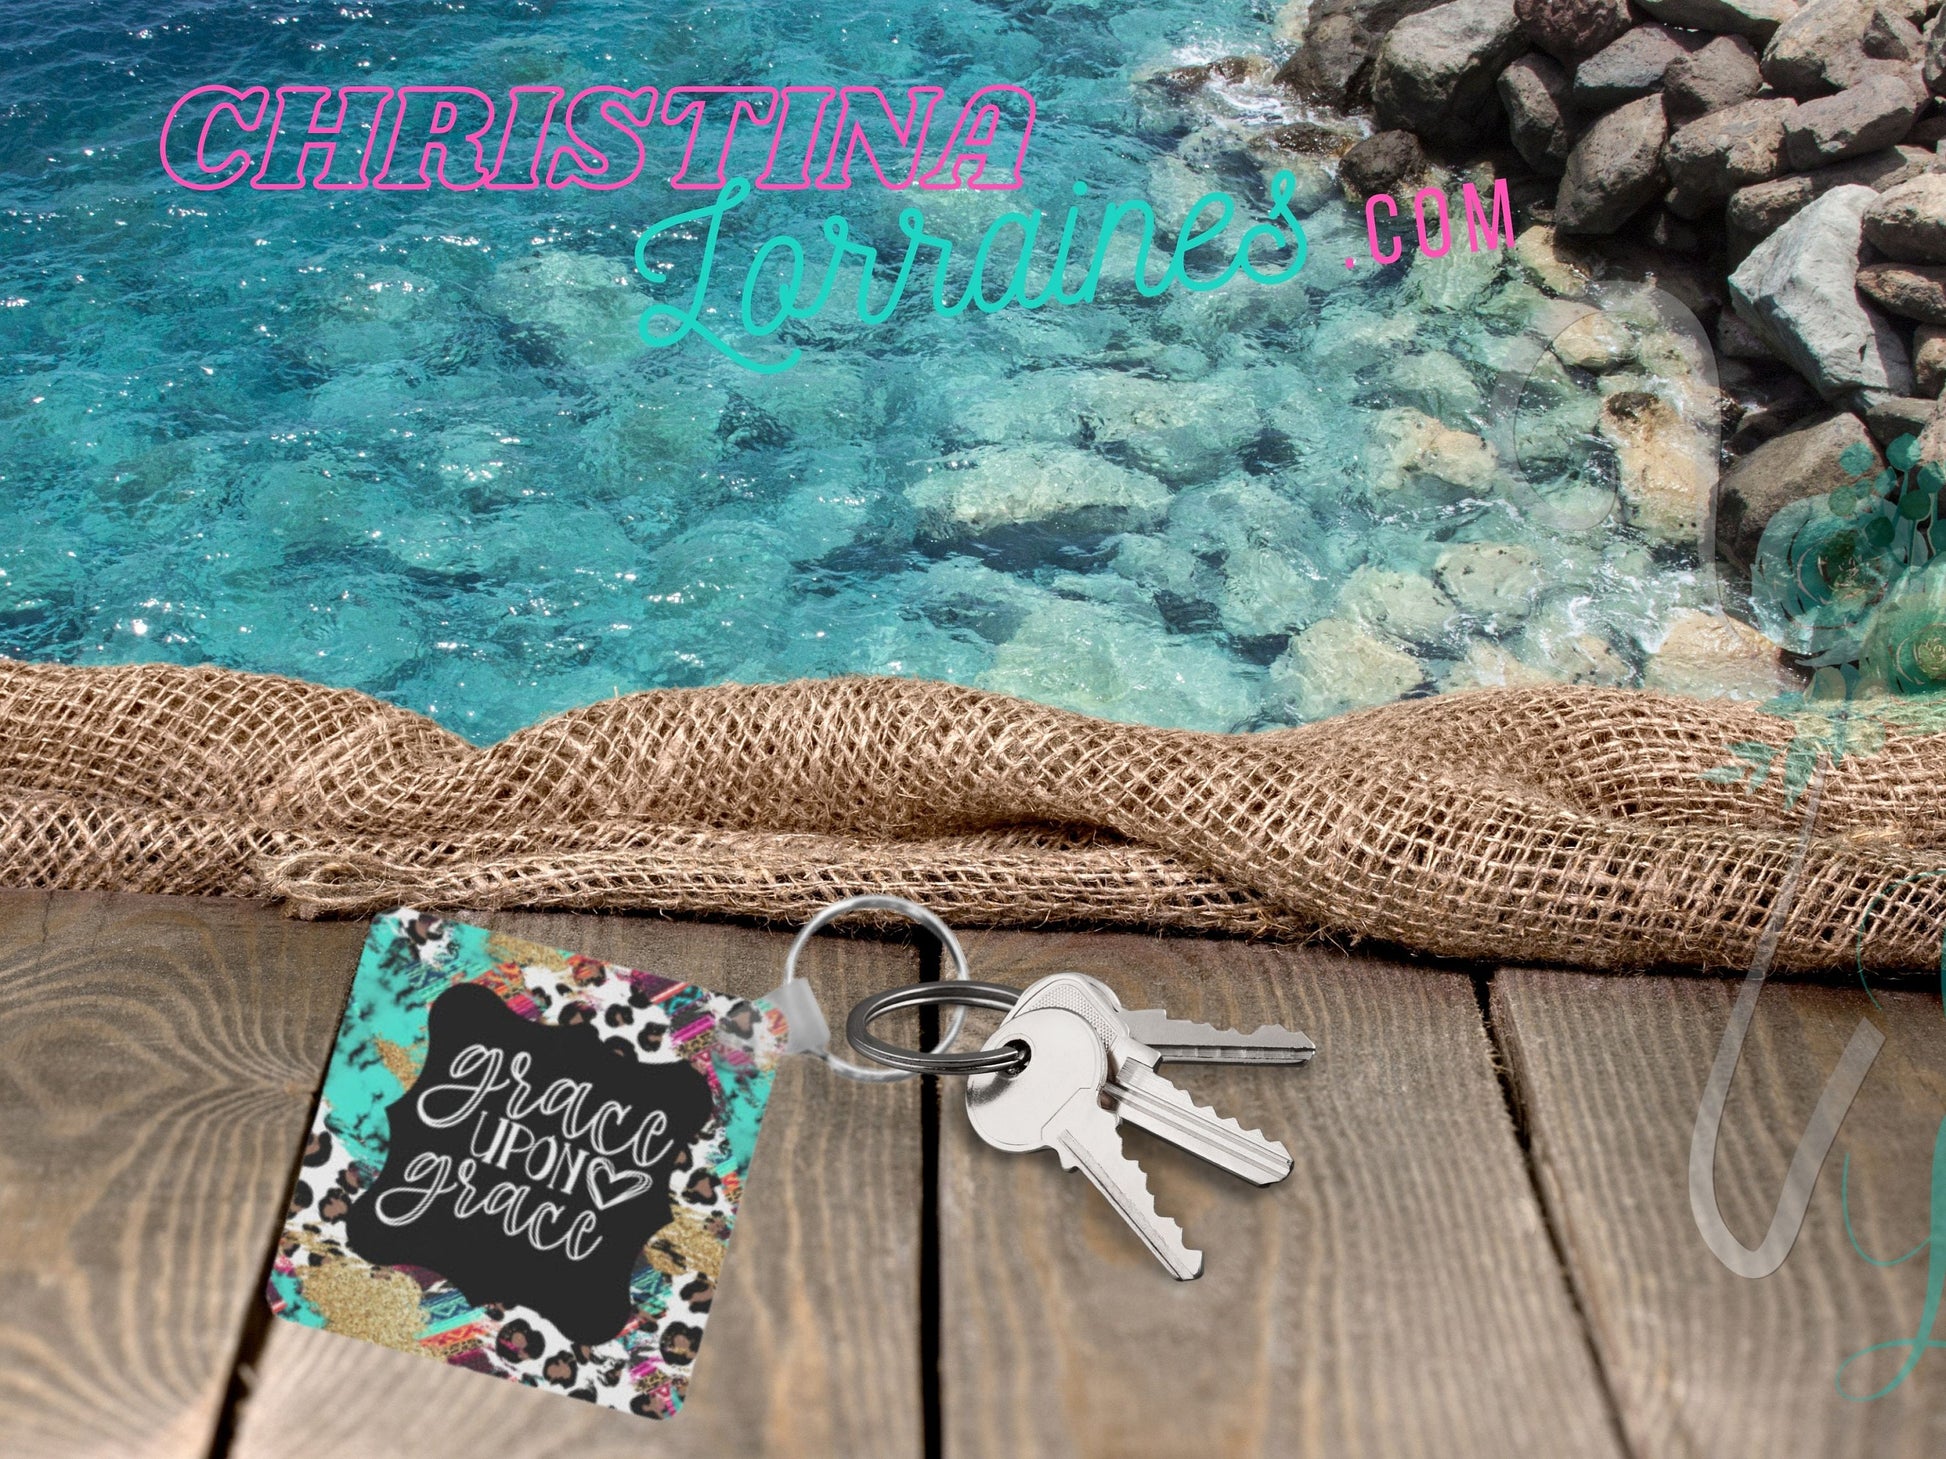 Leopard/Serape Print with Quote Grace Upon Grace Keychain